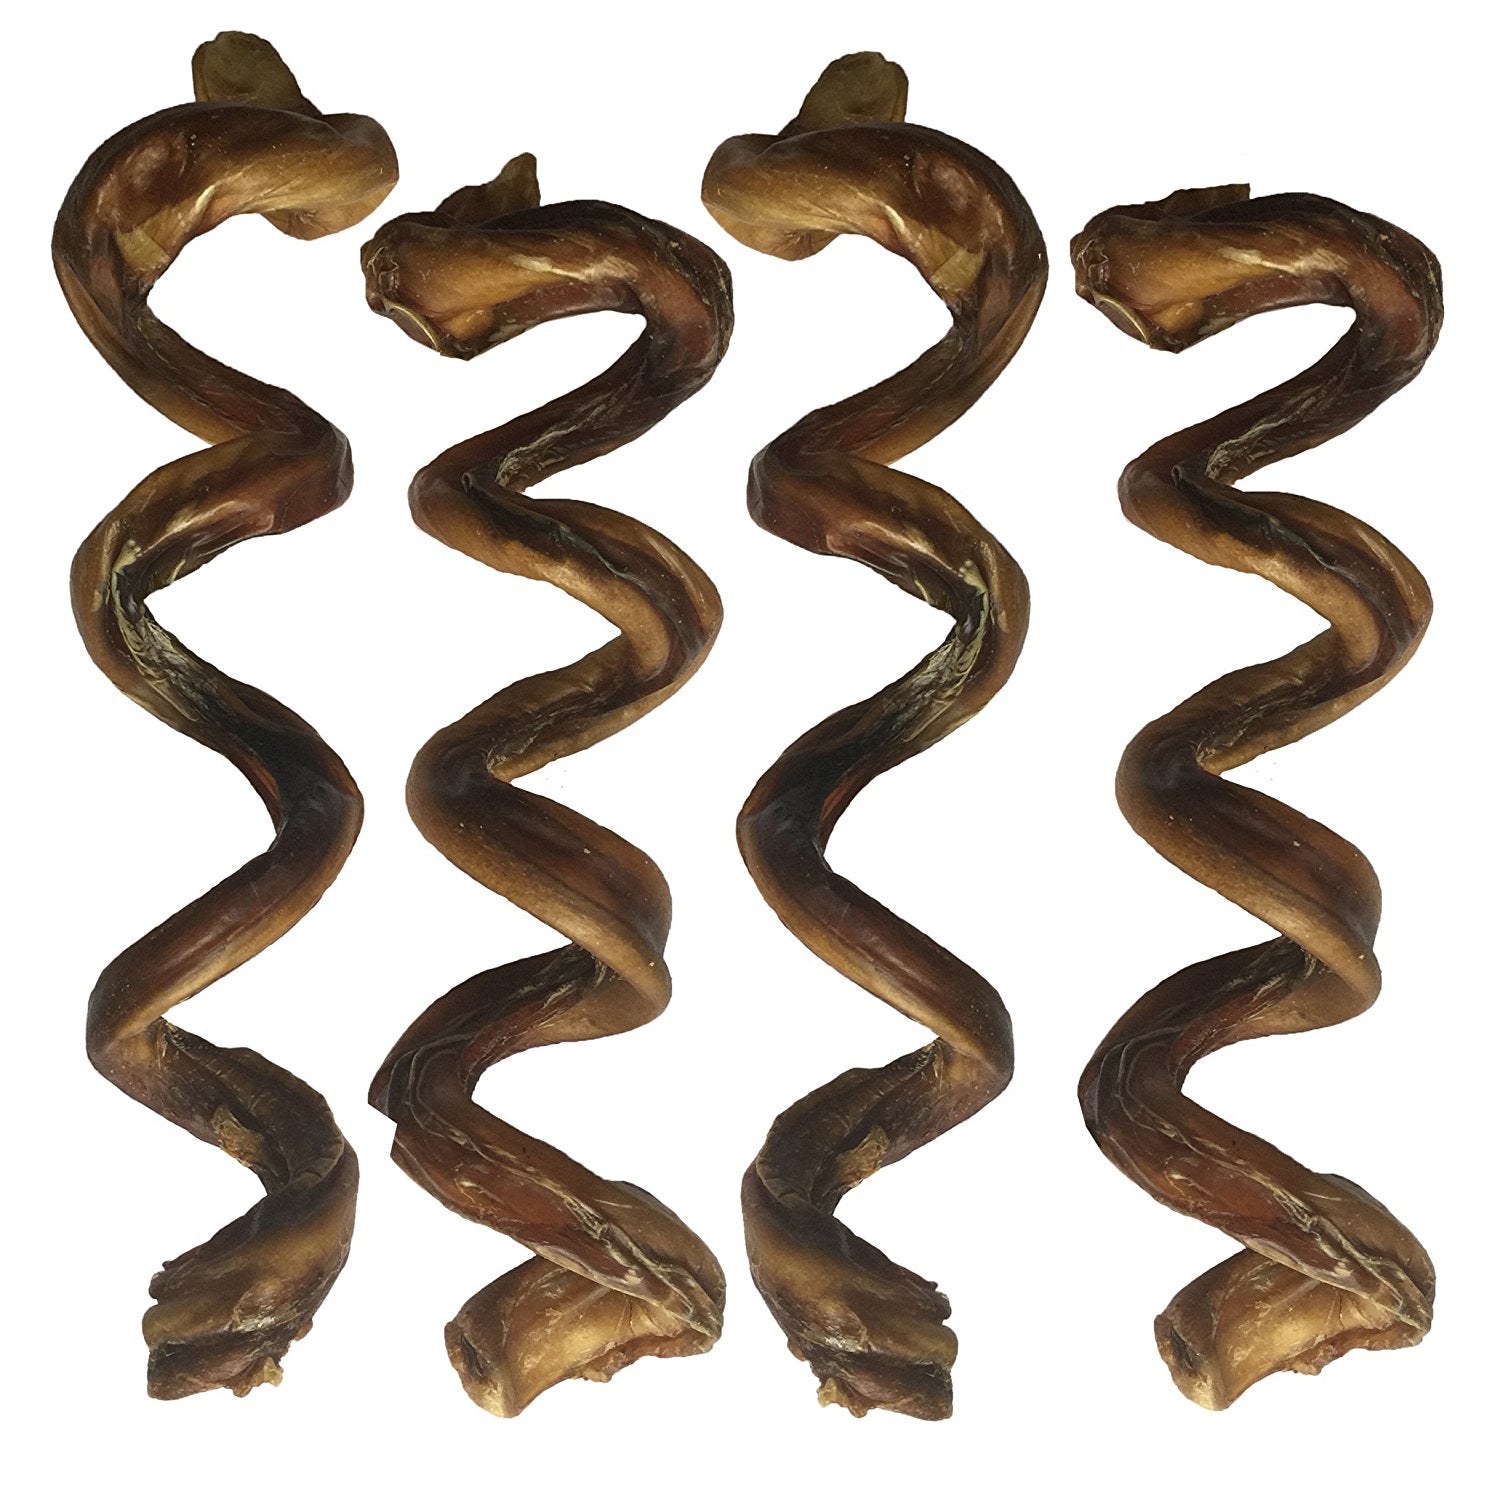 Spiral Bull Pizzle 9"| 1,4,10 or 25 Count Made in USA | 100% Natural Bully Springs Dog Chew | USDA Approved | by 123 Treats